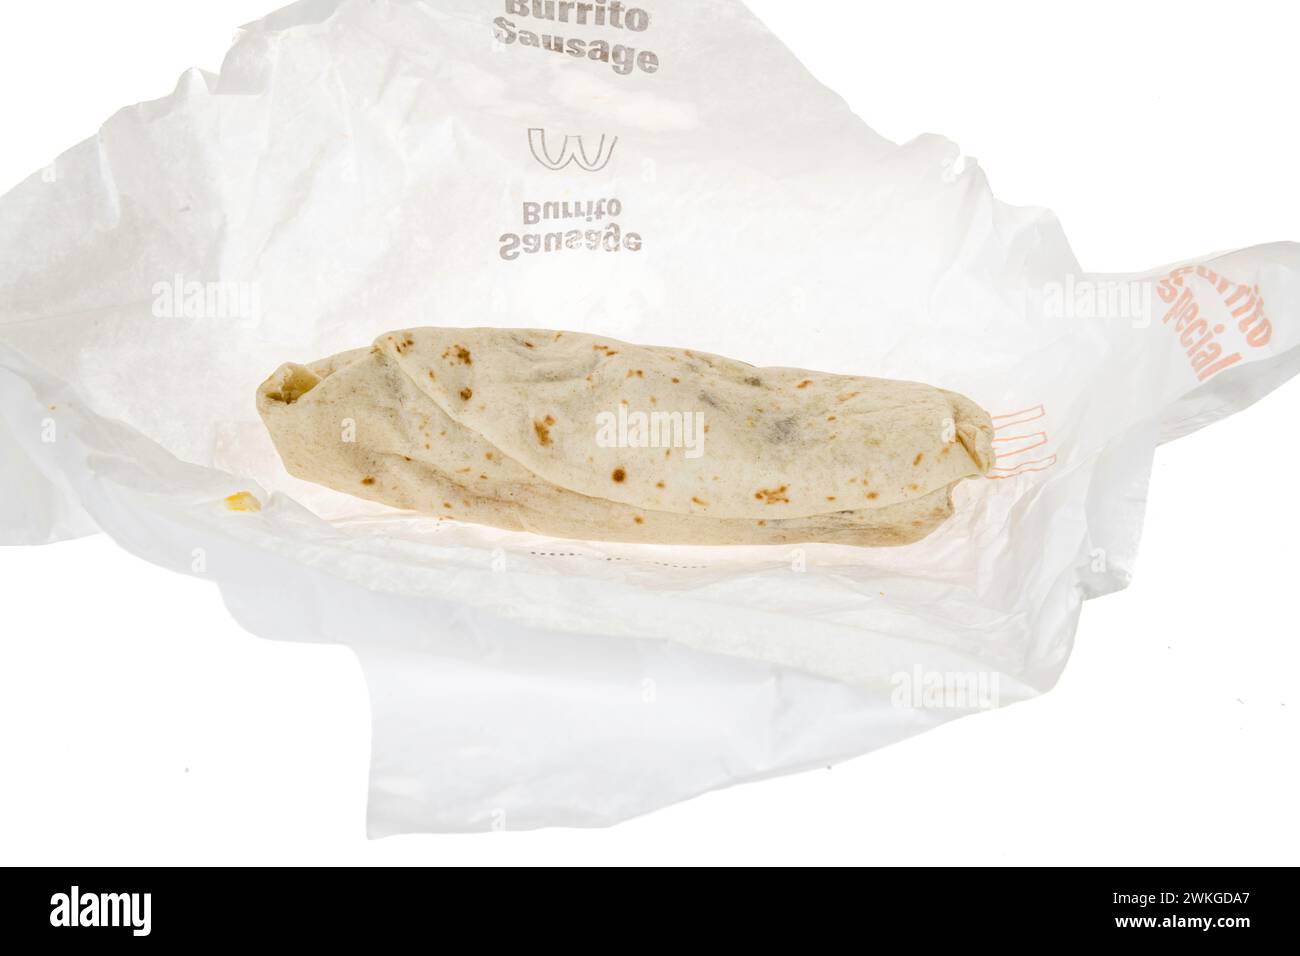 Winneconne, WI - 20 February 2024: A package of McDonalds sausage burrito on a wrapper on an isolated background. Stock Photo